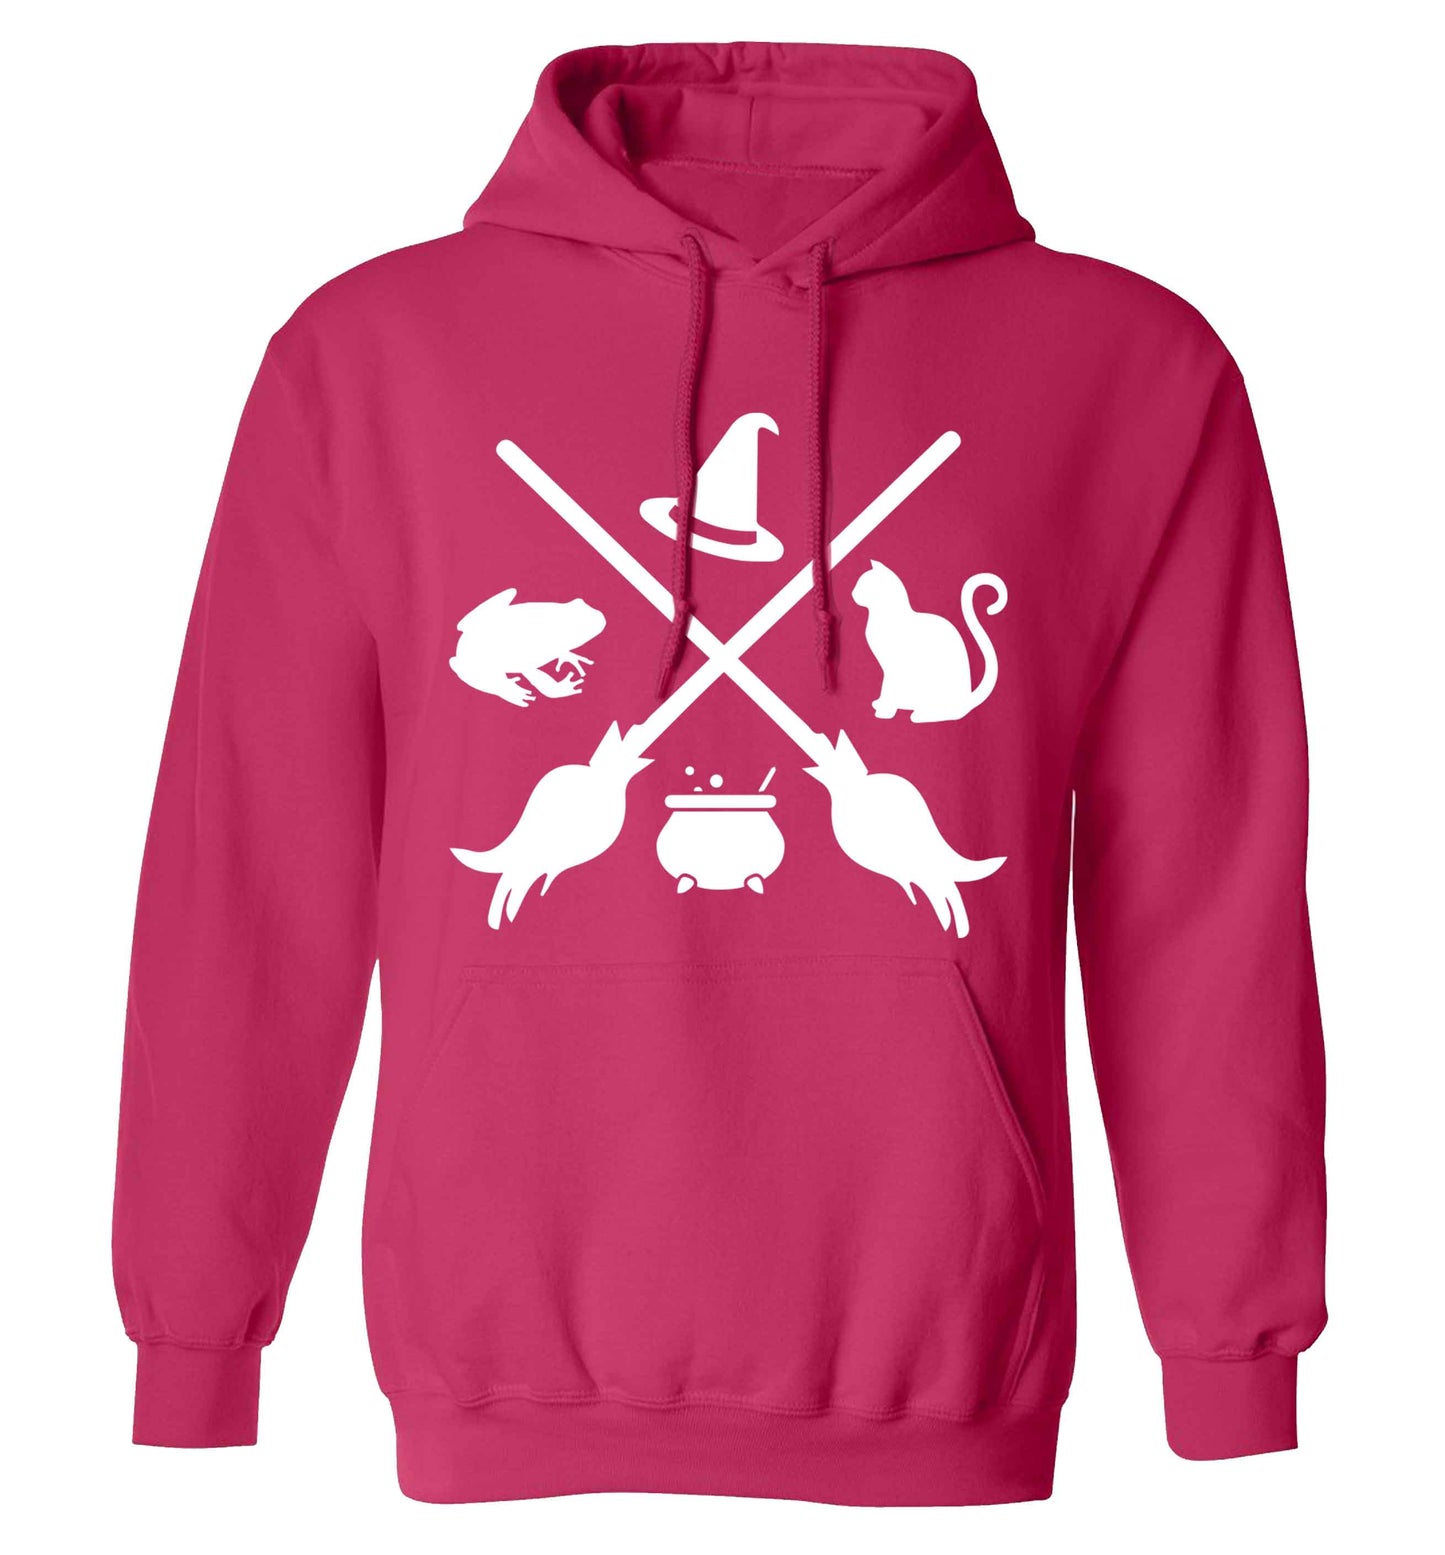 Witch symbol adults unisex pink hoodie 2XL